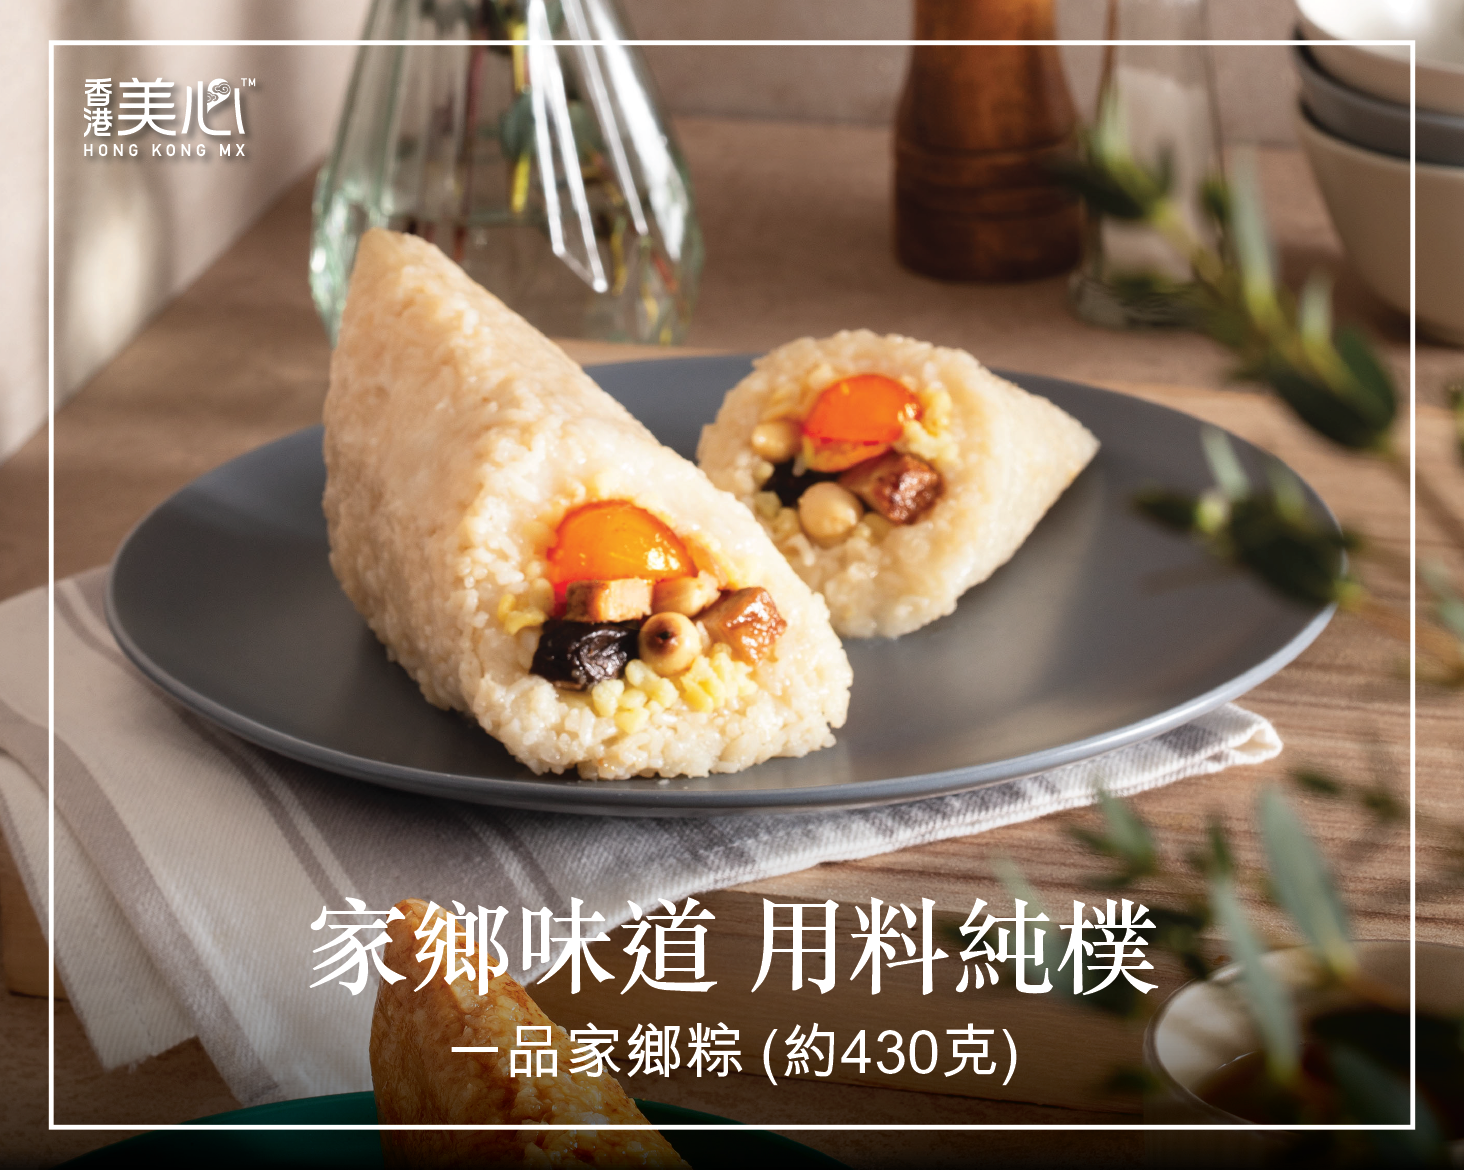 [JLL Offer] Maxim’s | Home Made Style Rice Dumpling with Soy Sauce Stewed Pork e-Voucher